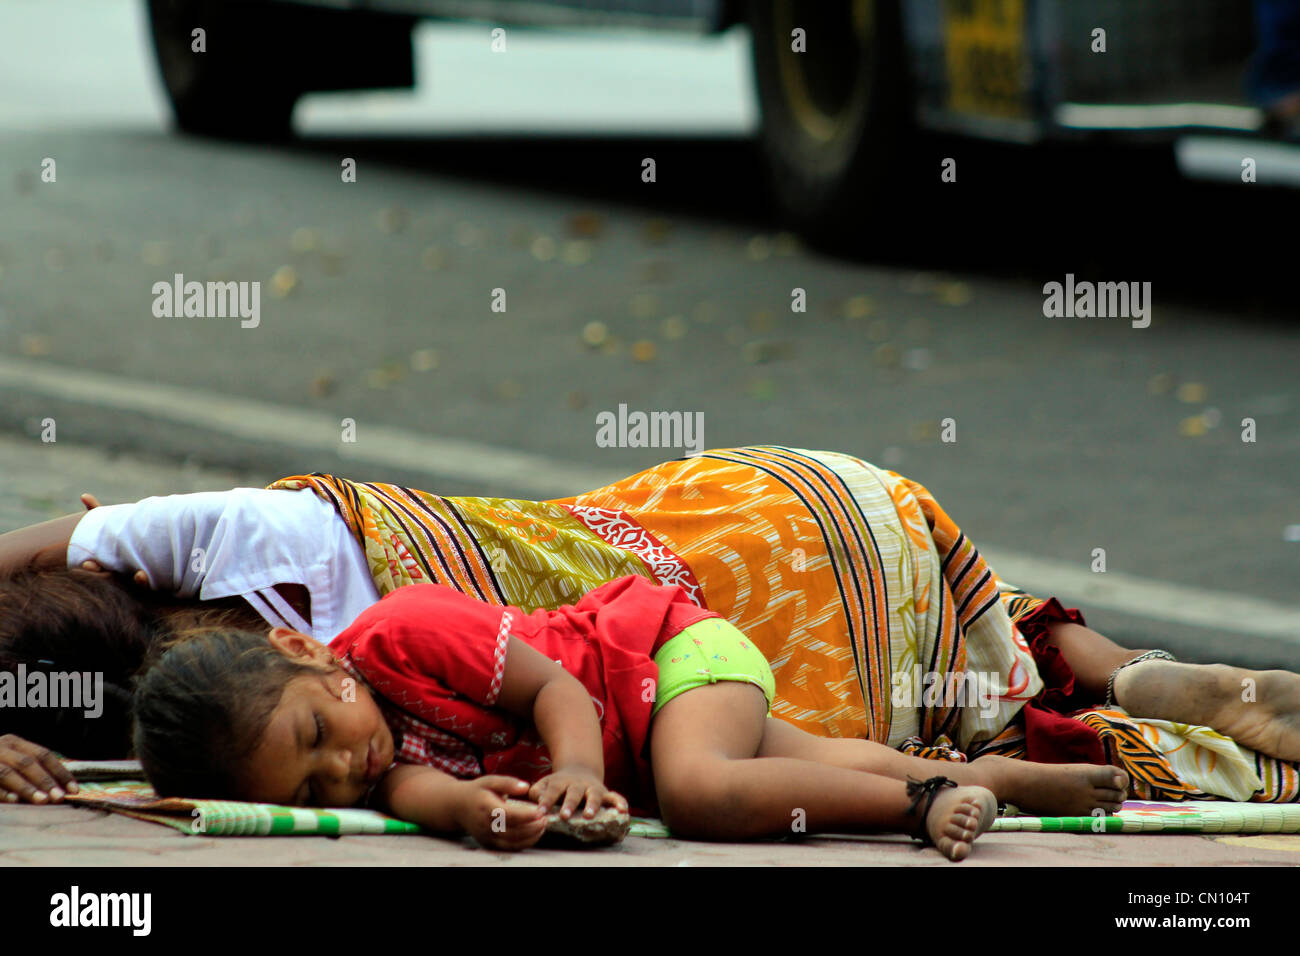 homeless mother and child sleeping on the footpath in Mumbai, India Stock Photo